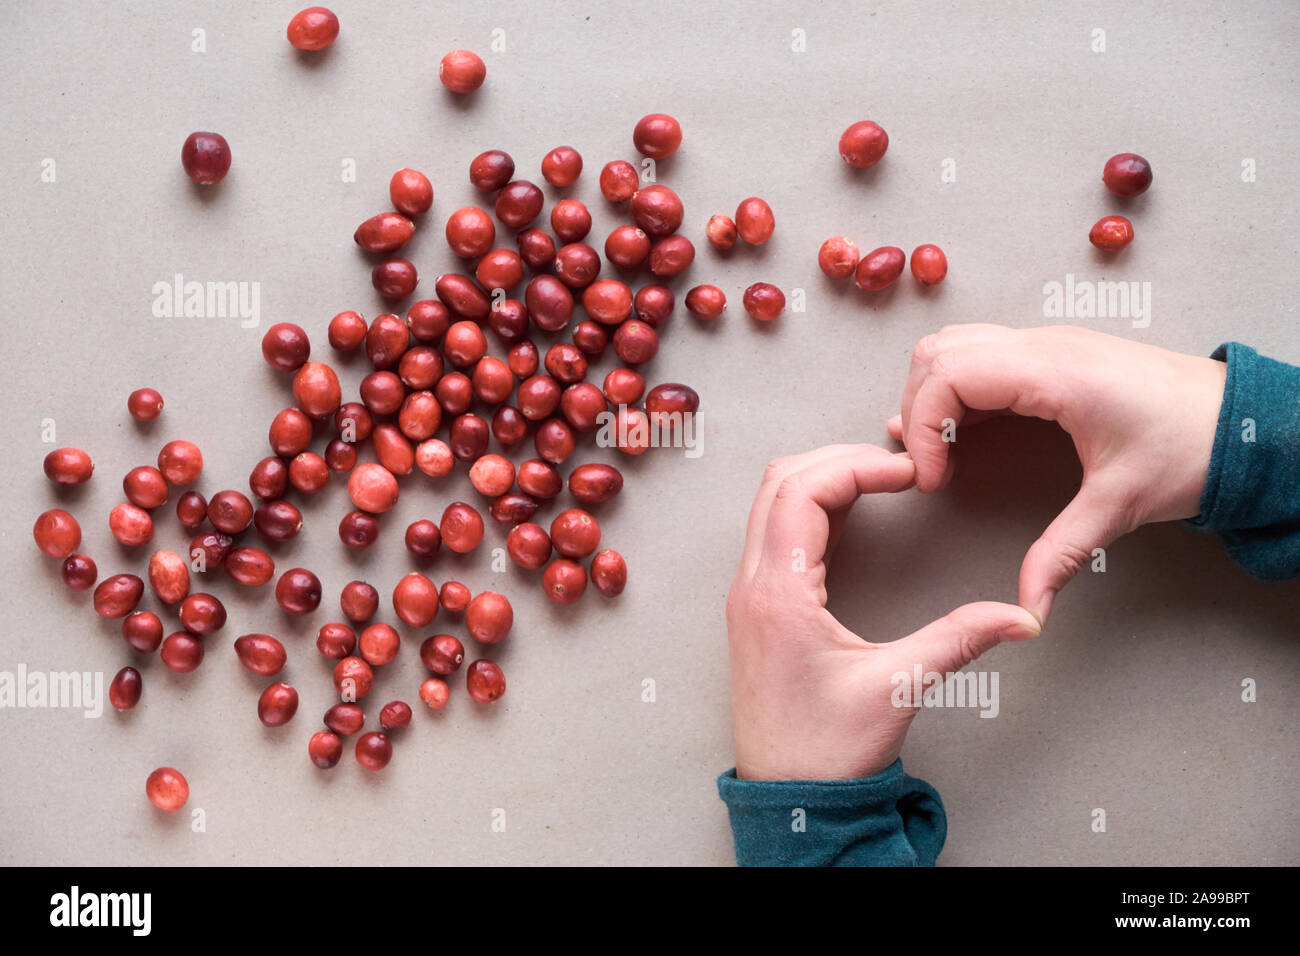 Raw fresh cranberry berry, view from above. Cranberry background, top view, flat lay on craft paper. Cranberries scattered on recycled brown paper, fe Stock Photo